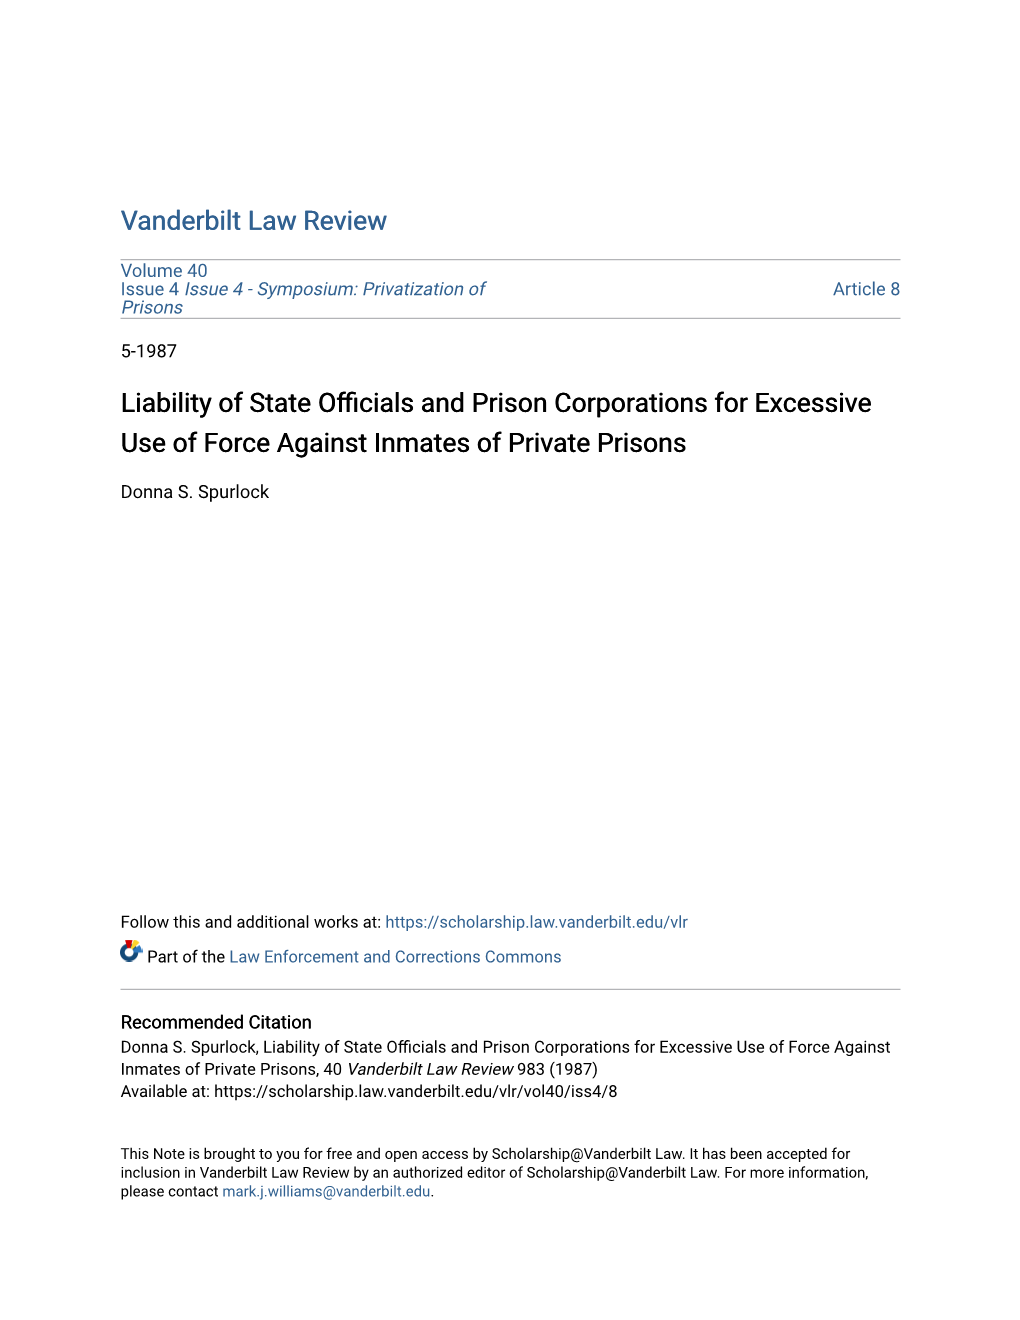 Liability of State Officials and Prison Corporations for Excessive Use of Force Against Inmates of Private Prisons